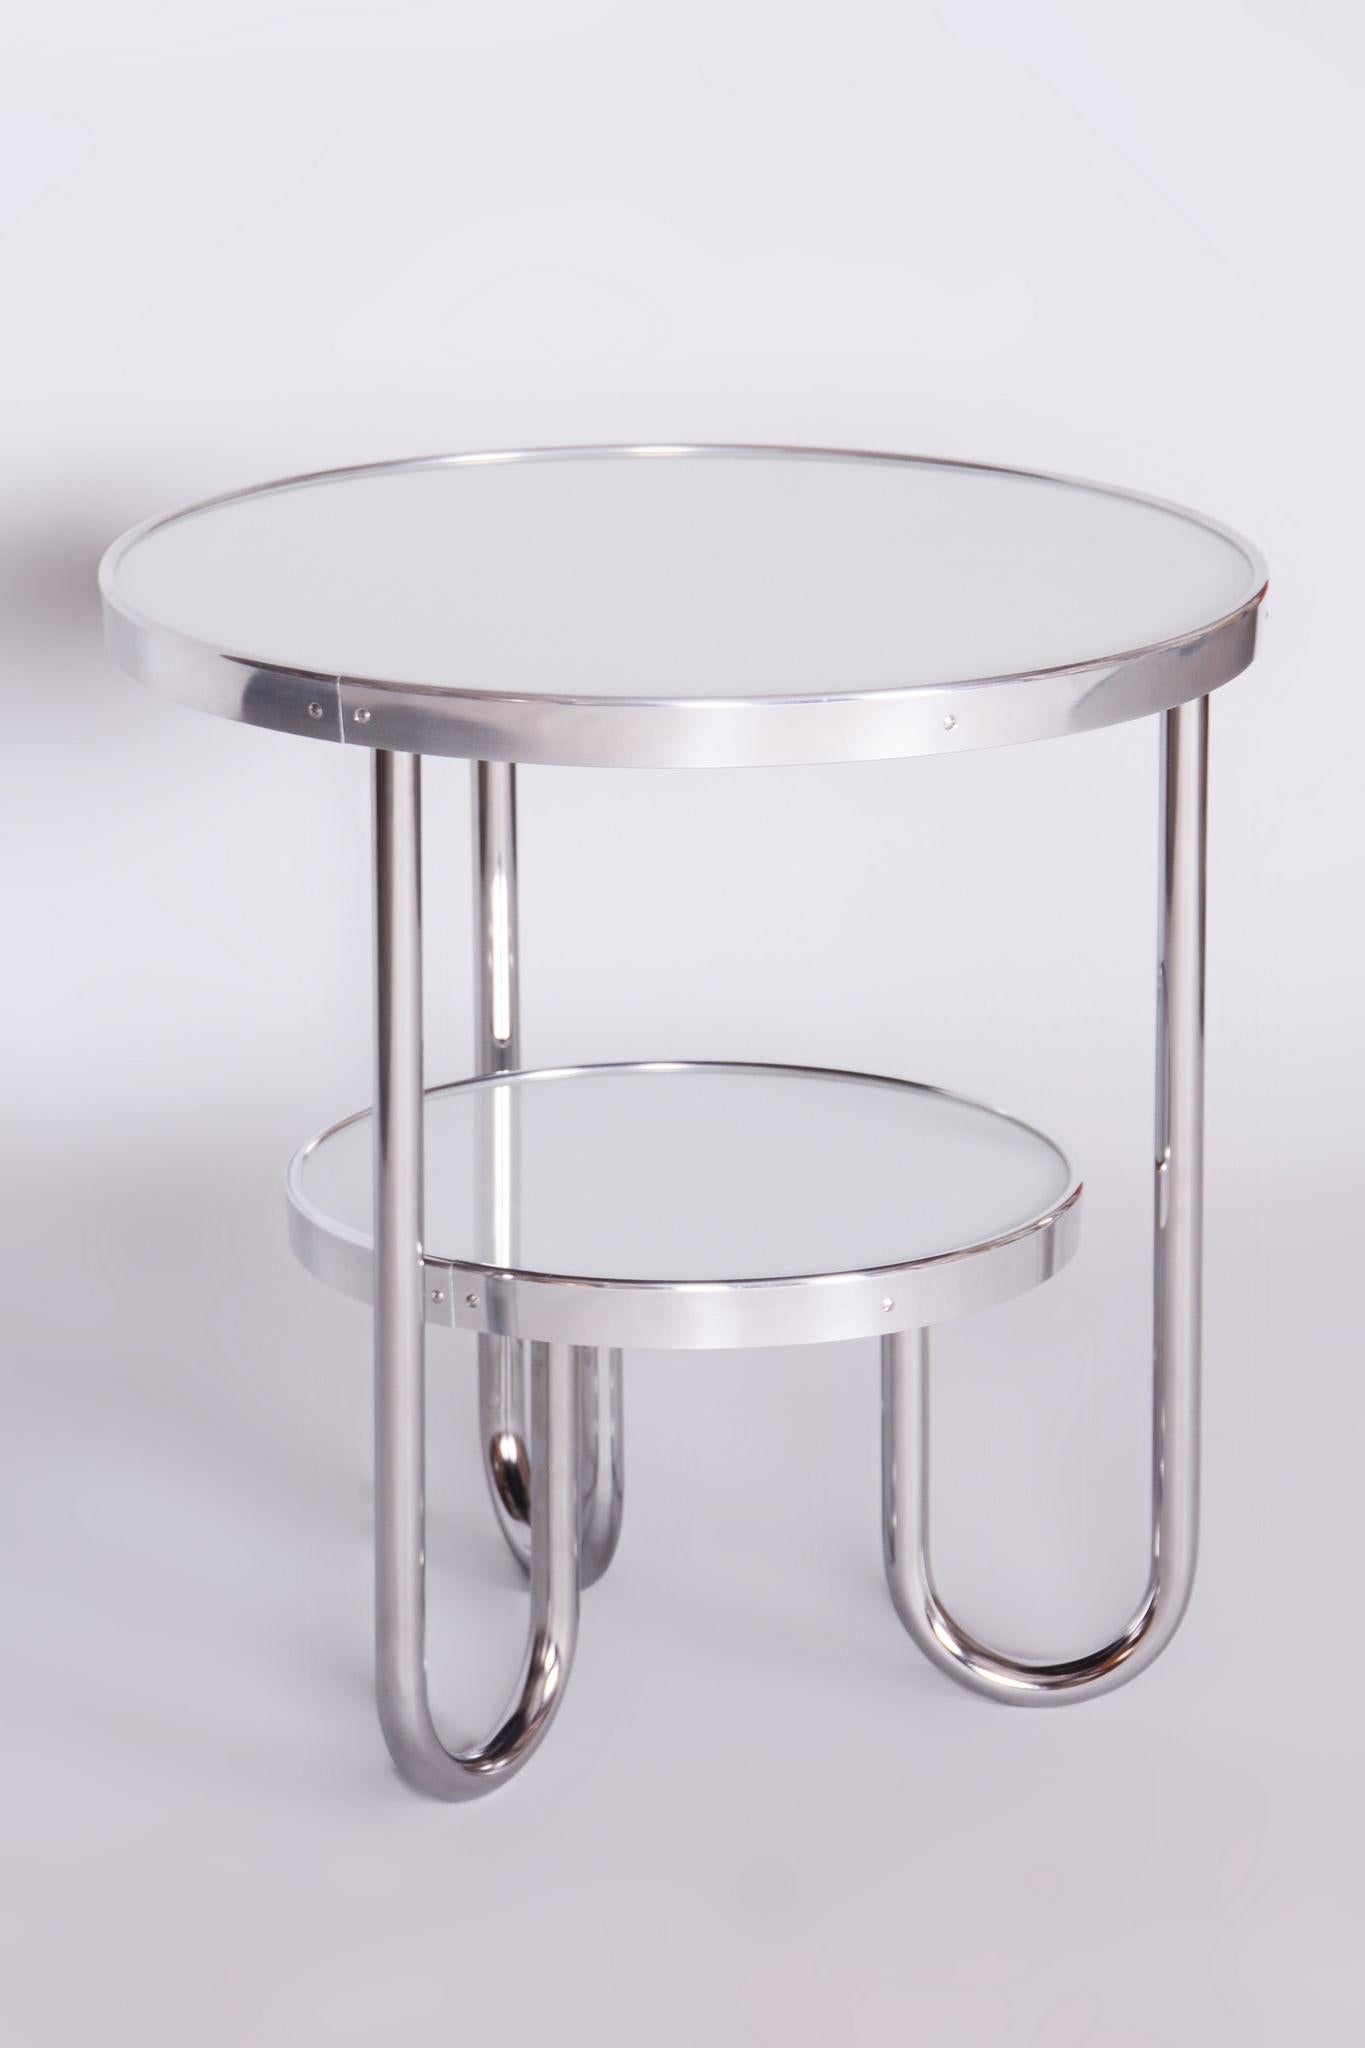 Restored Bauhaus Small White Table Made By Kovona

Period: 1930-1939
Source: Czechia (Czechoslovakia)
Material: Chrome-Plated Steel, Spruce Wood, Glass

Made by Kovona, a renowned Czech manufacturer and dealer from the 20th century.

The chrome